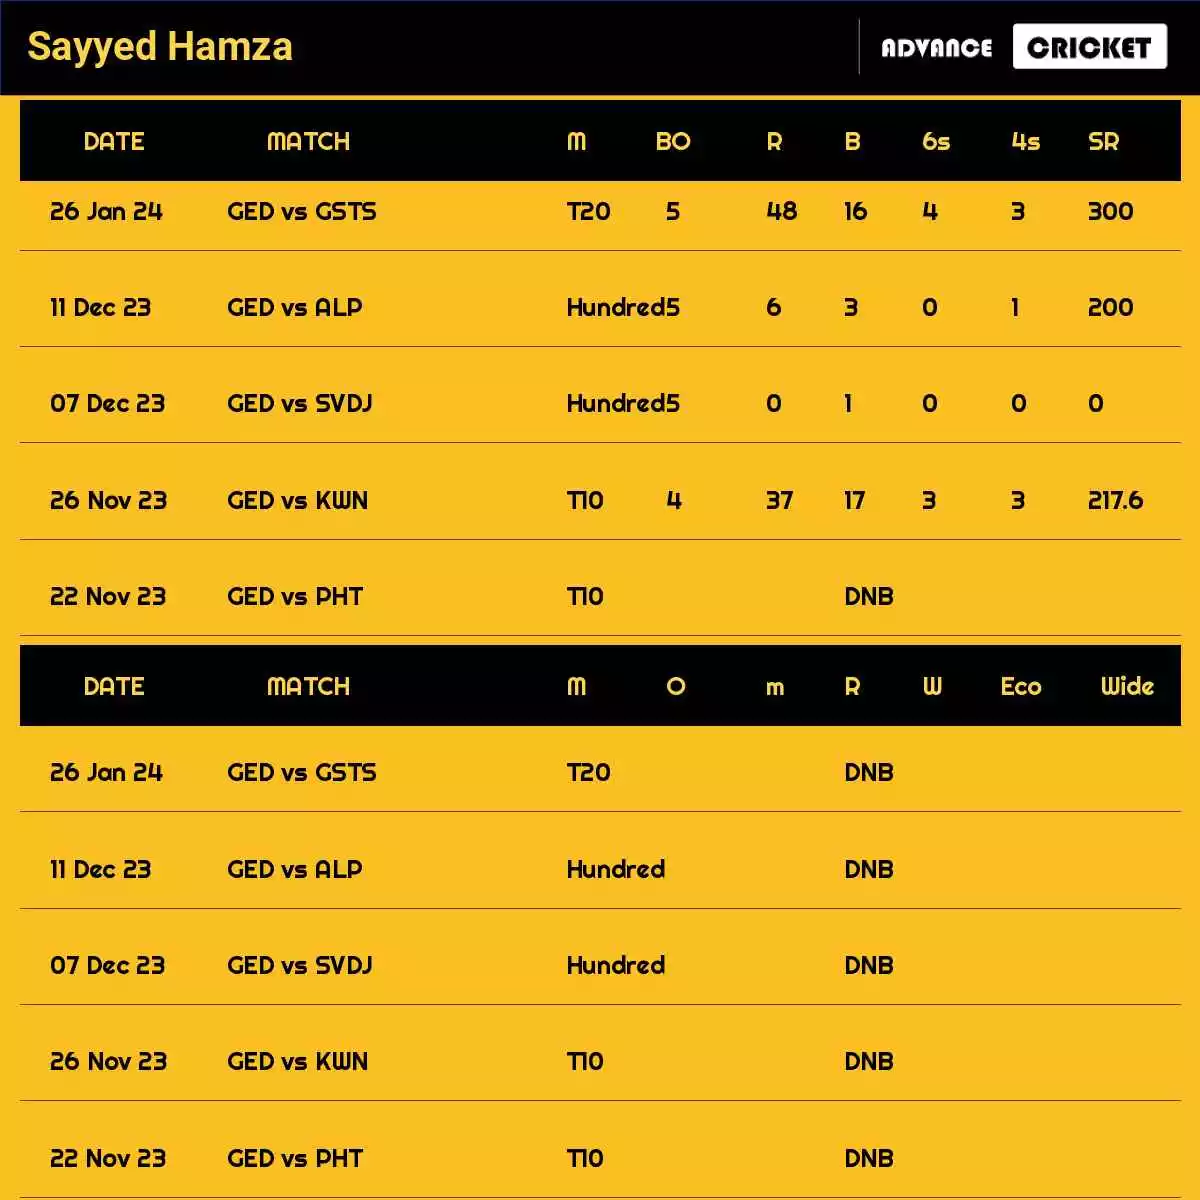 Sayyed Hamza Recent Matches Details Date Wise